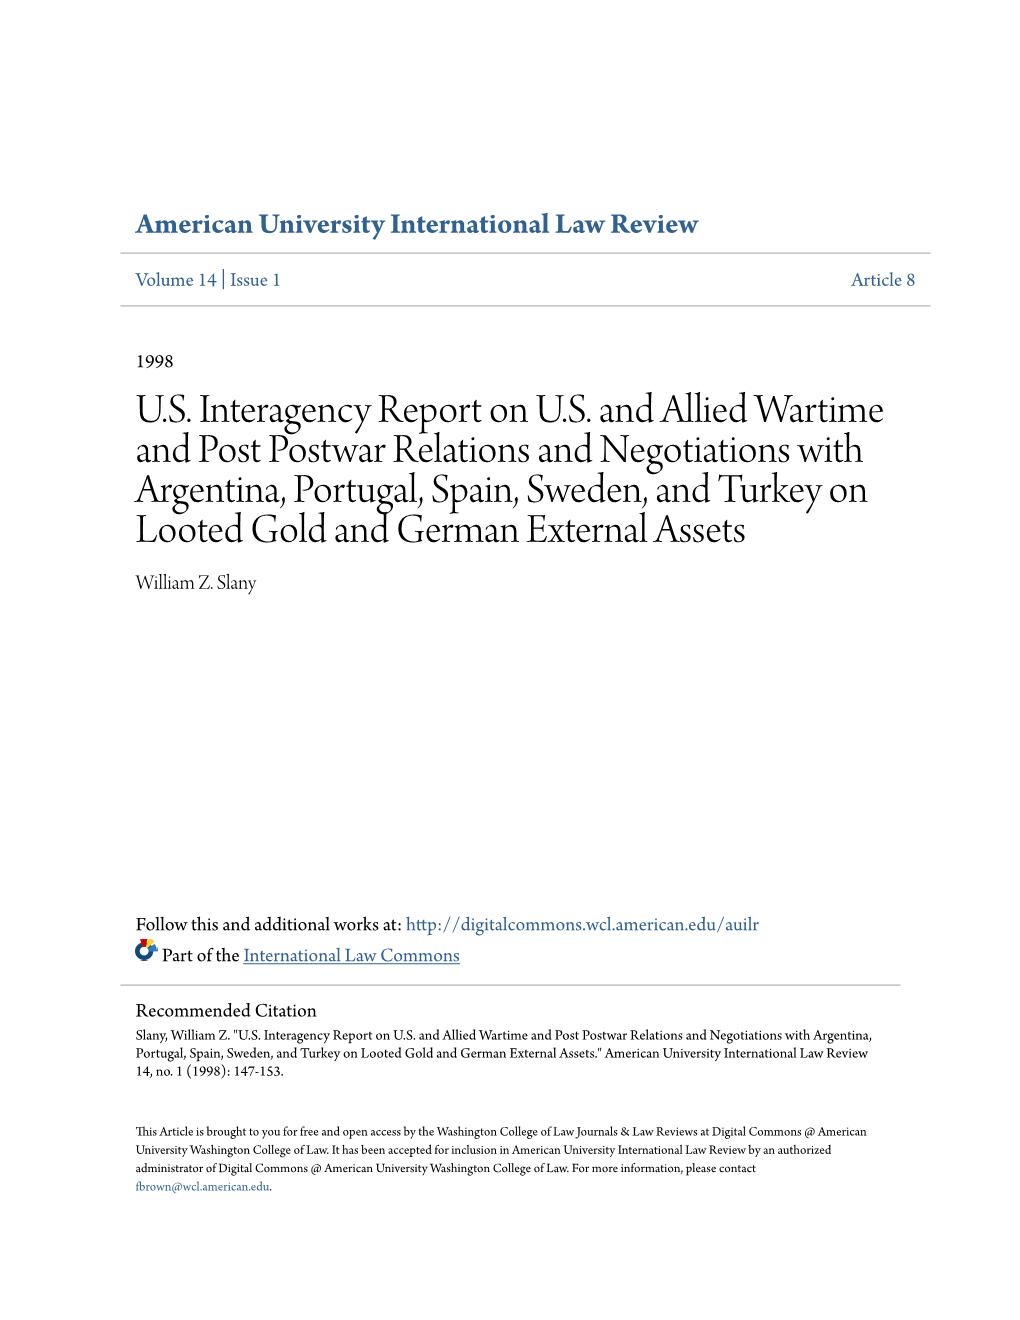 US Interagency Report on US and Allied